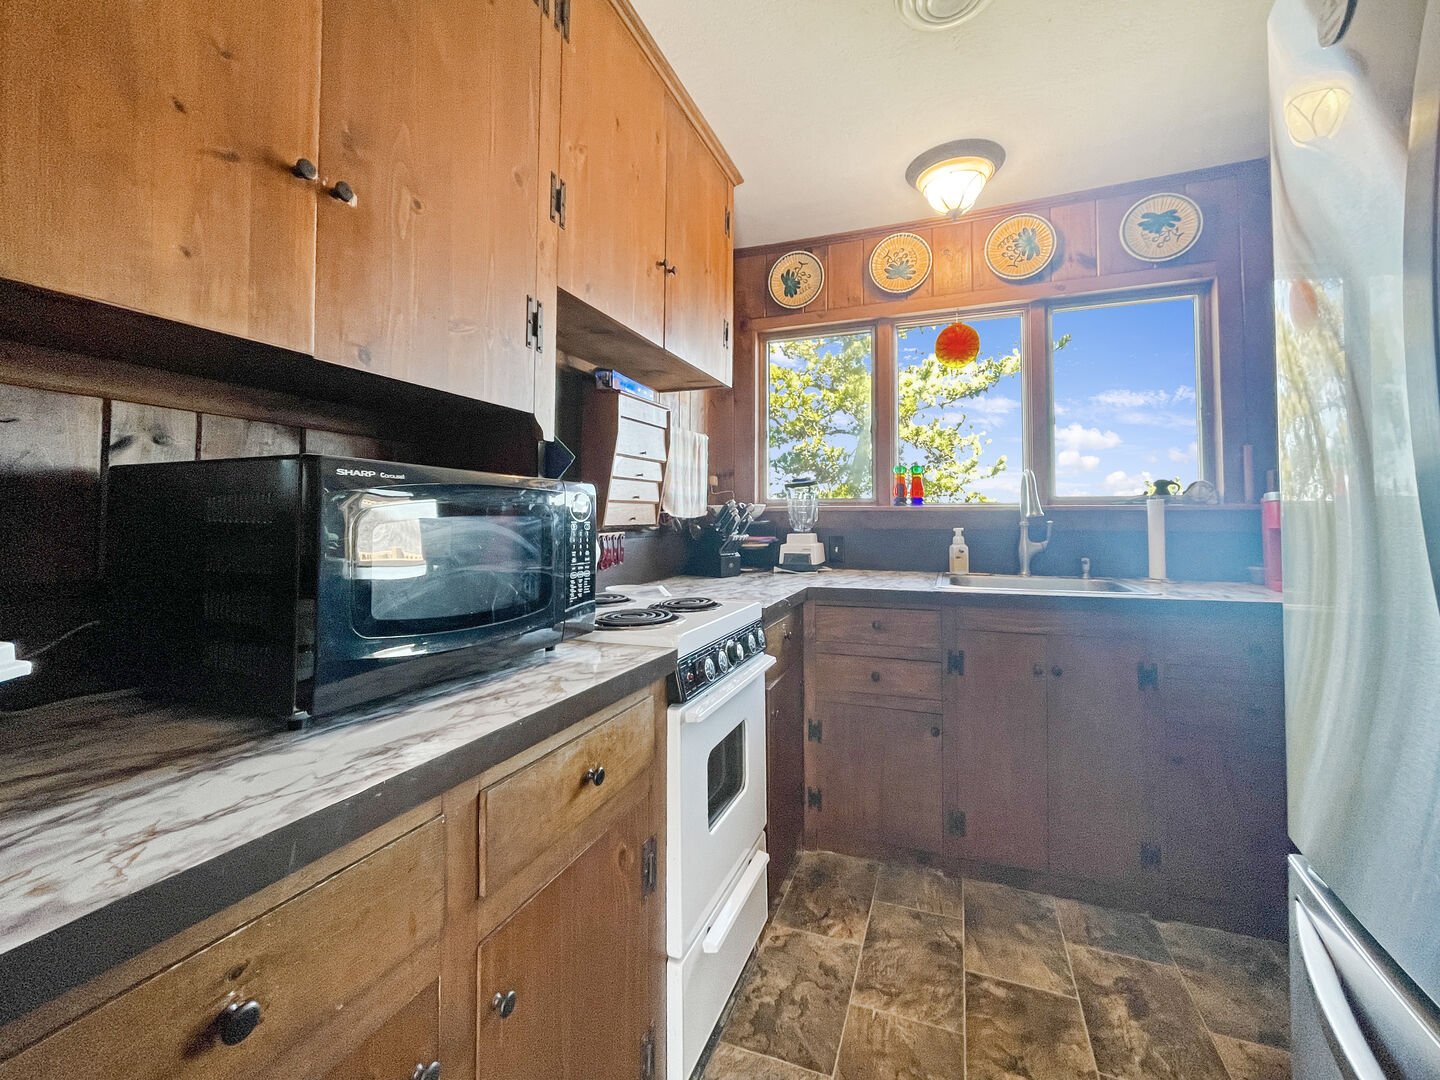 Fully equipped kitchen with microwave